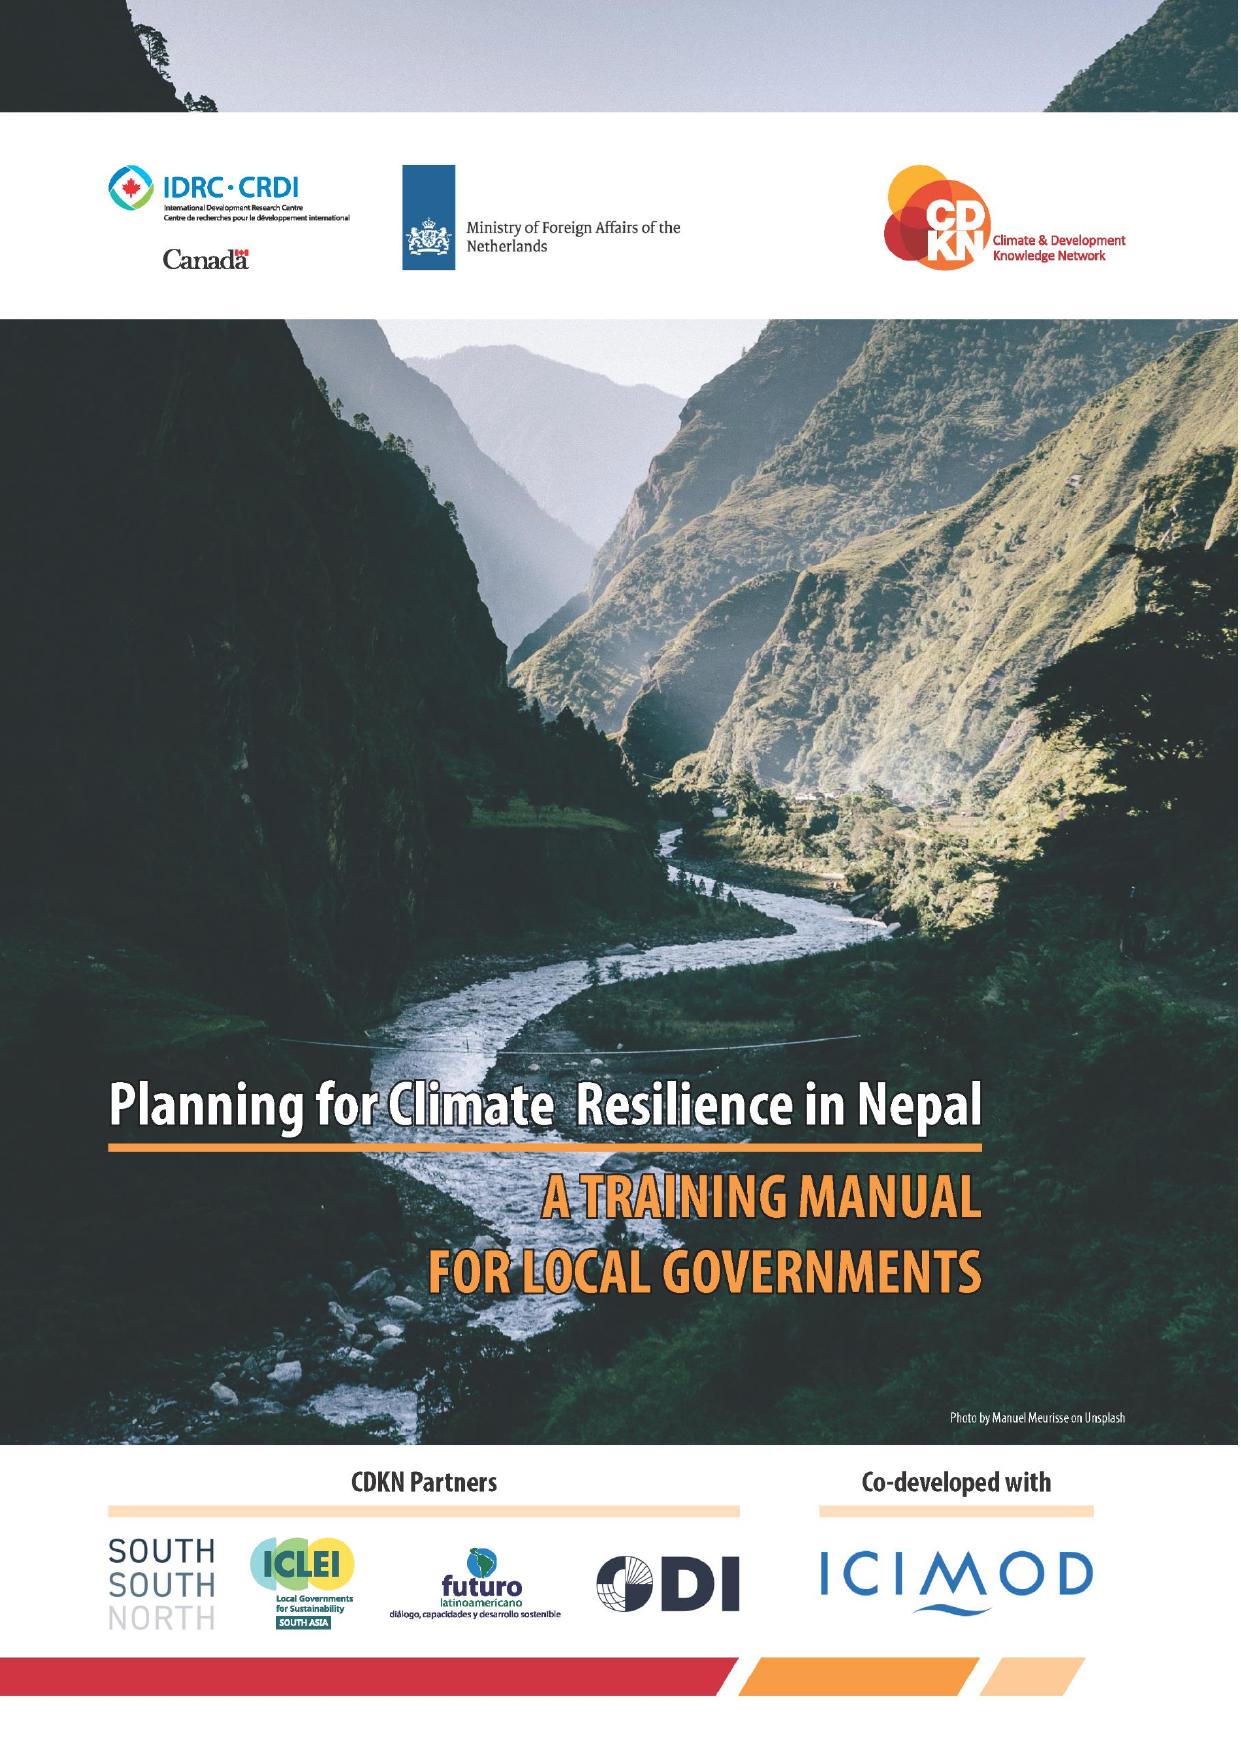 Planning for climate resilience in Nepal: A training manual for local governments